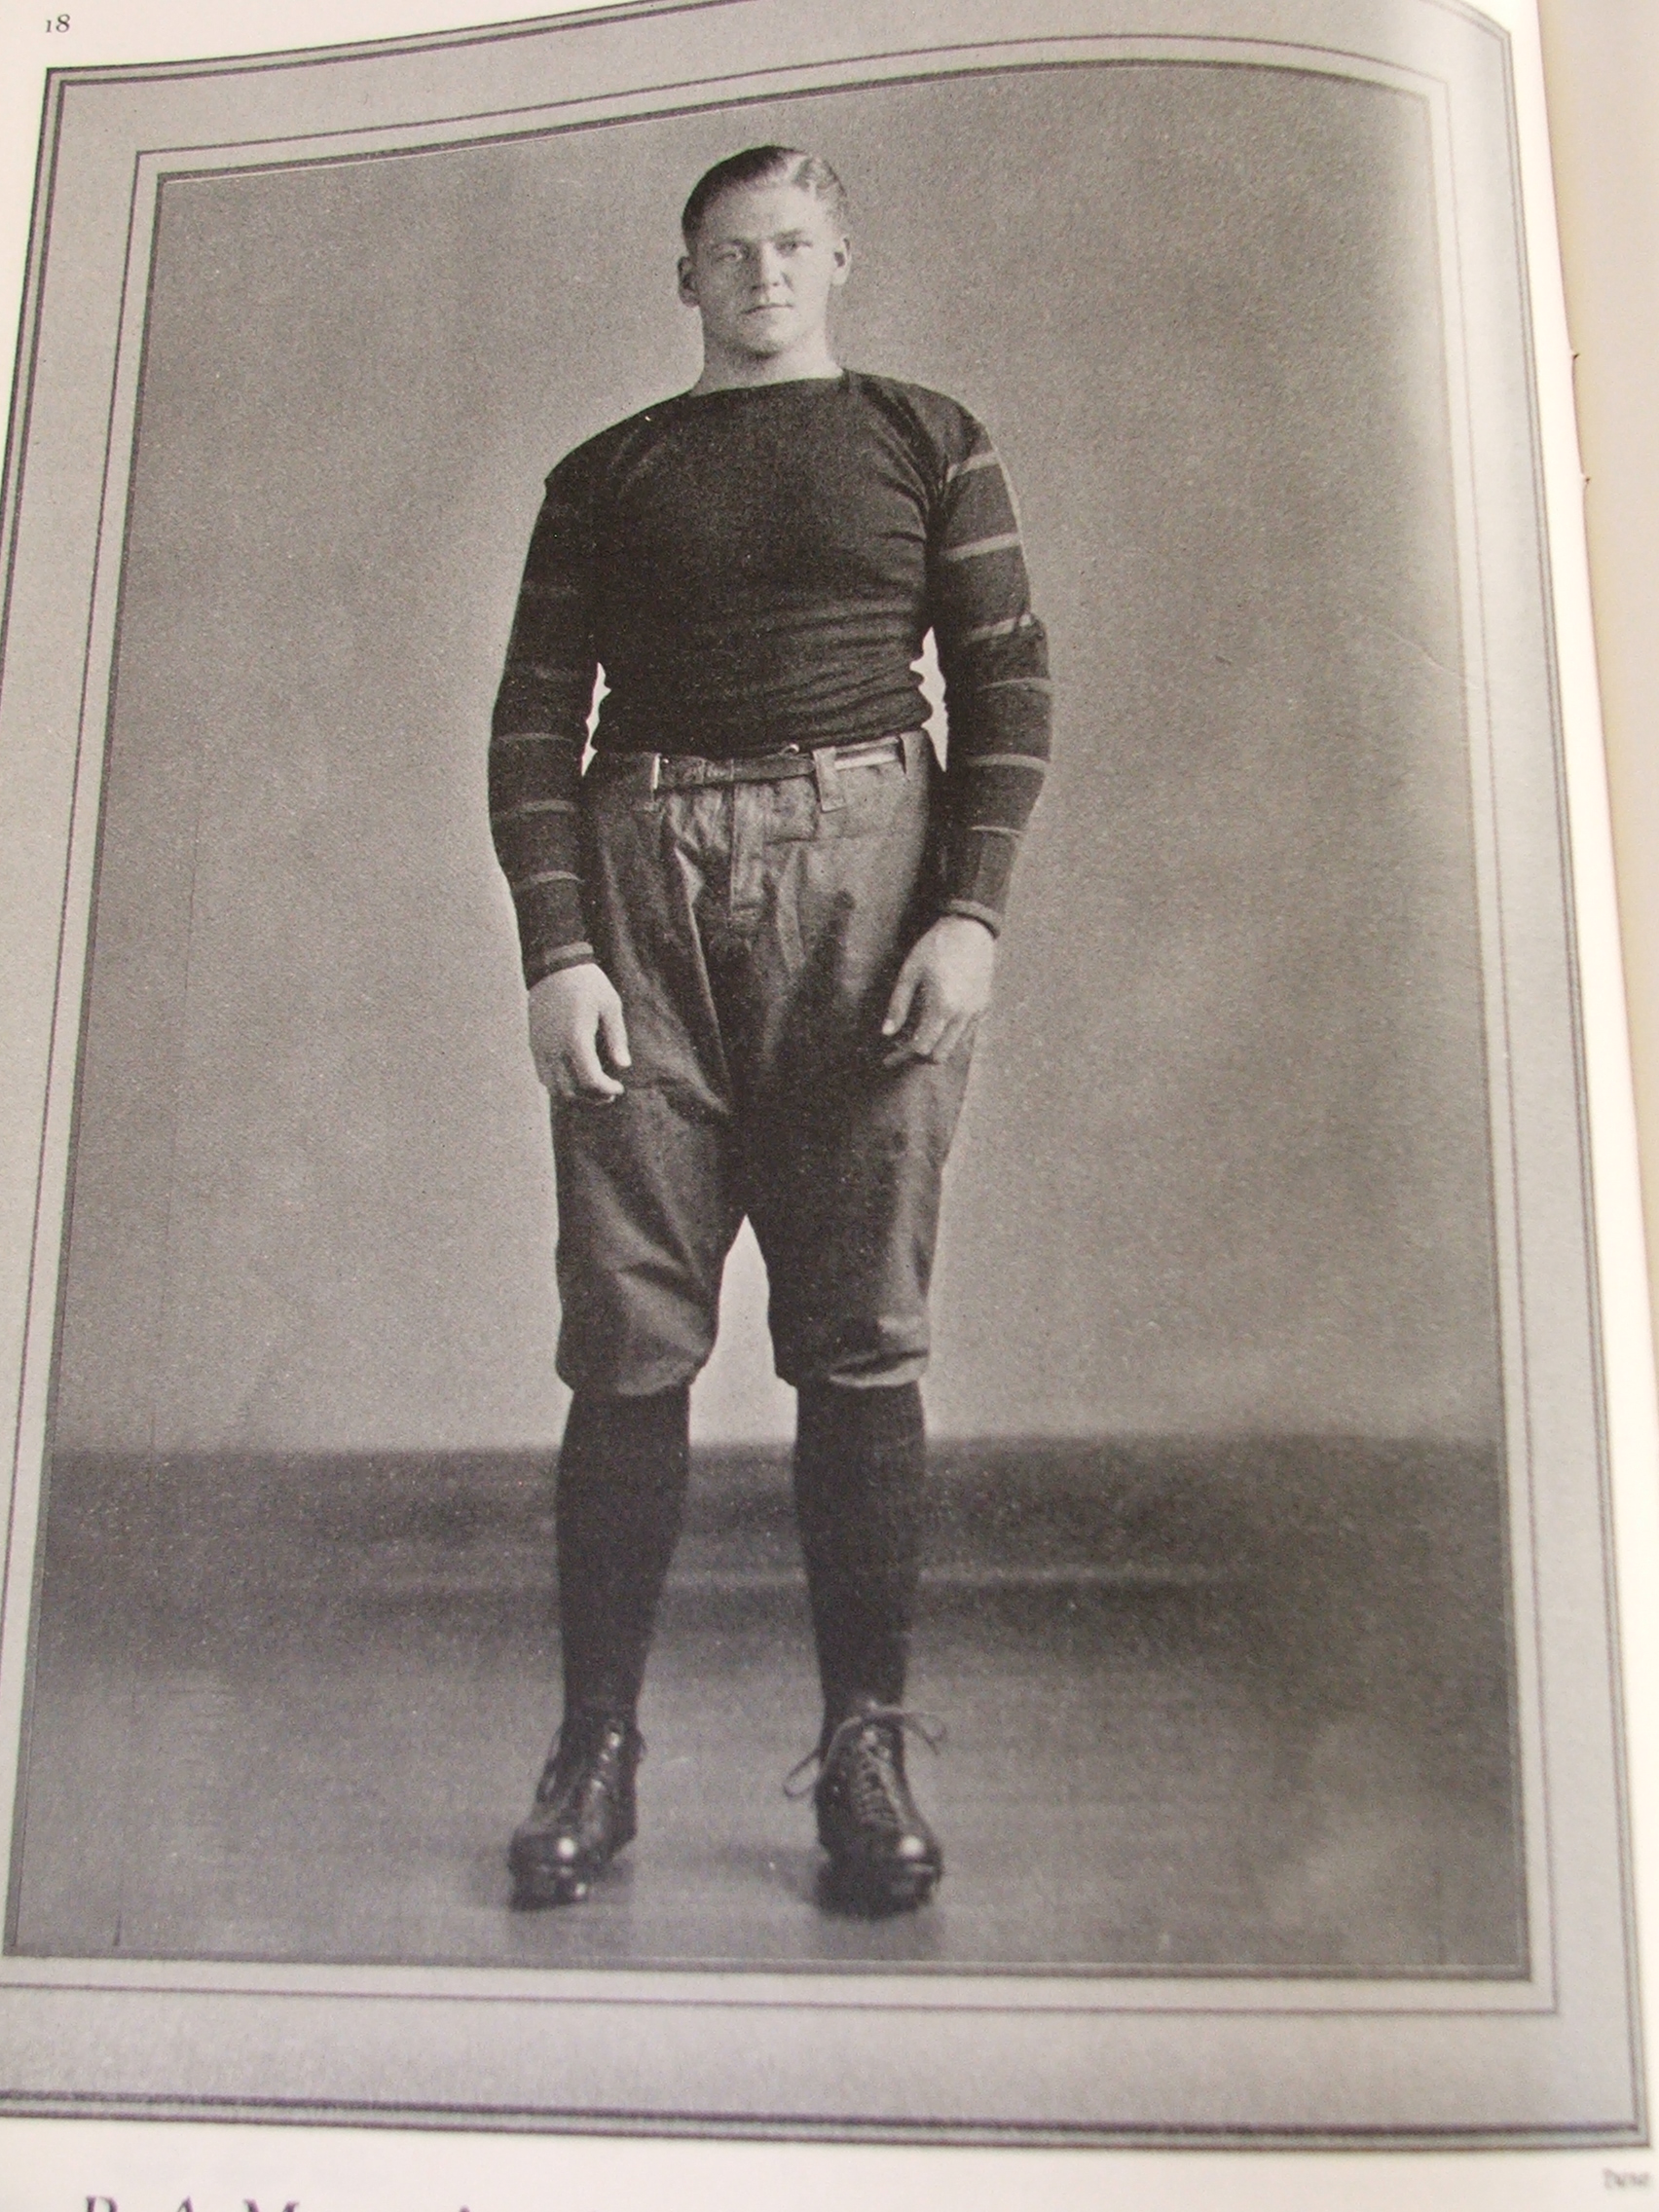 ... Captain in 1930, R.A. Mestres in a uniform without padding